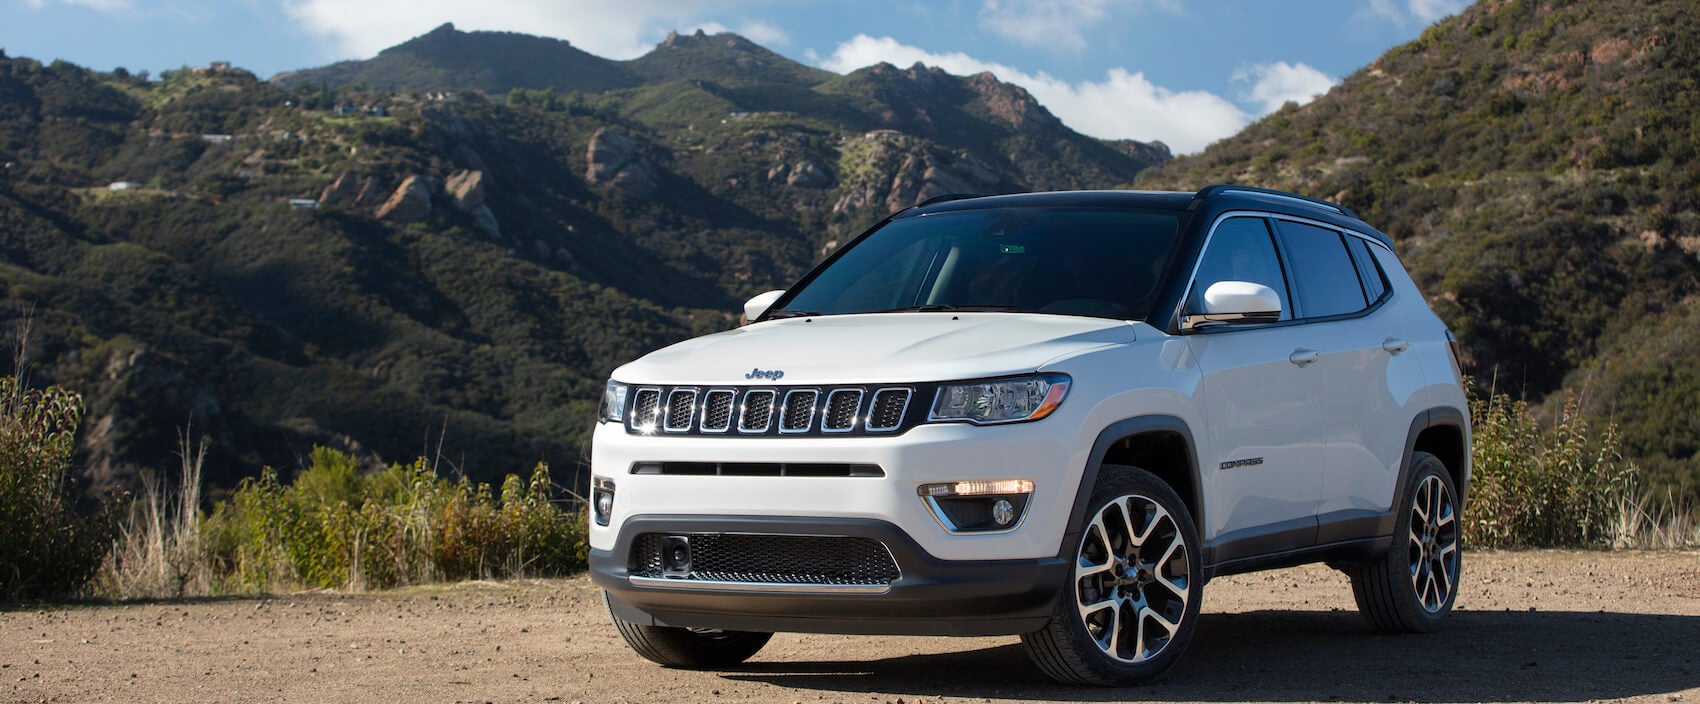 2021 Jeep Compass review